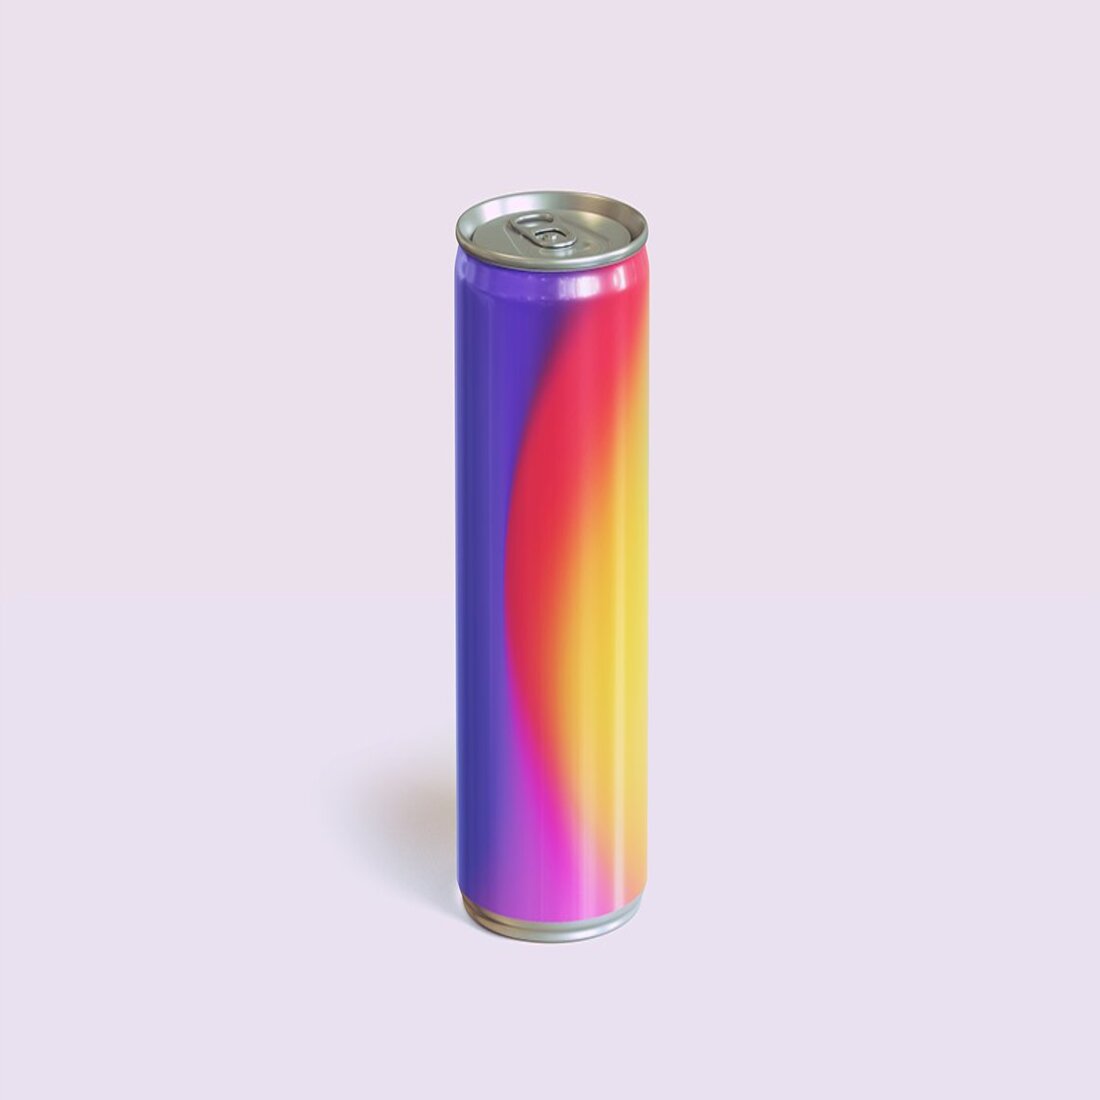 Gradient Backgrounds cover.